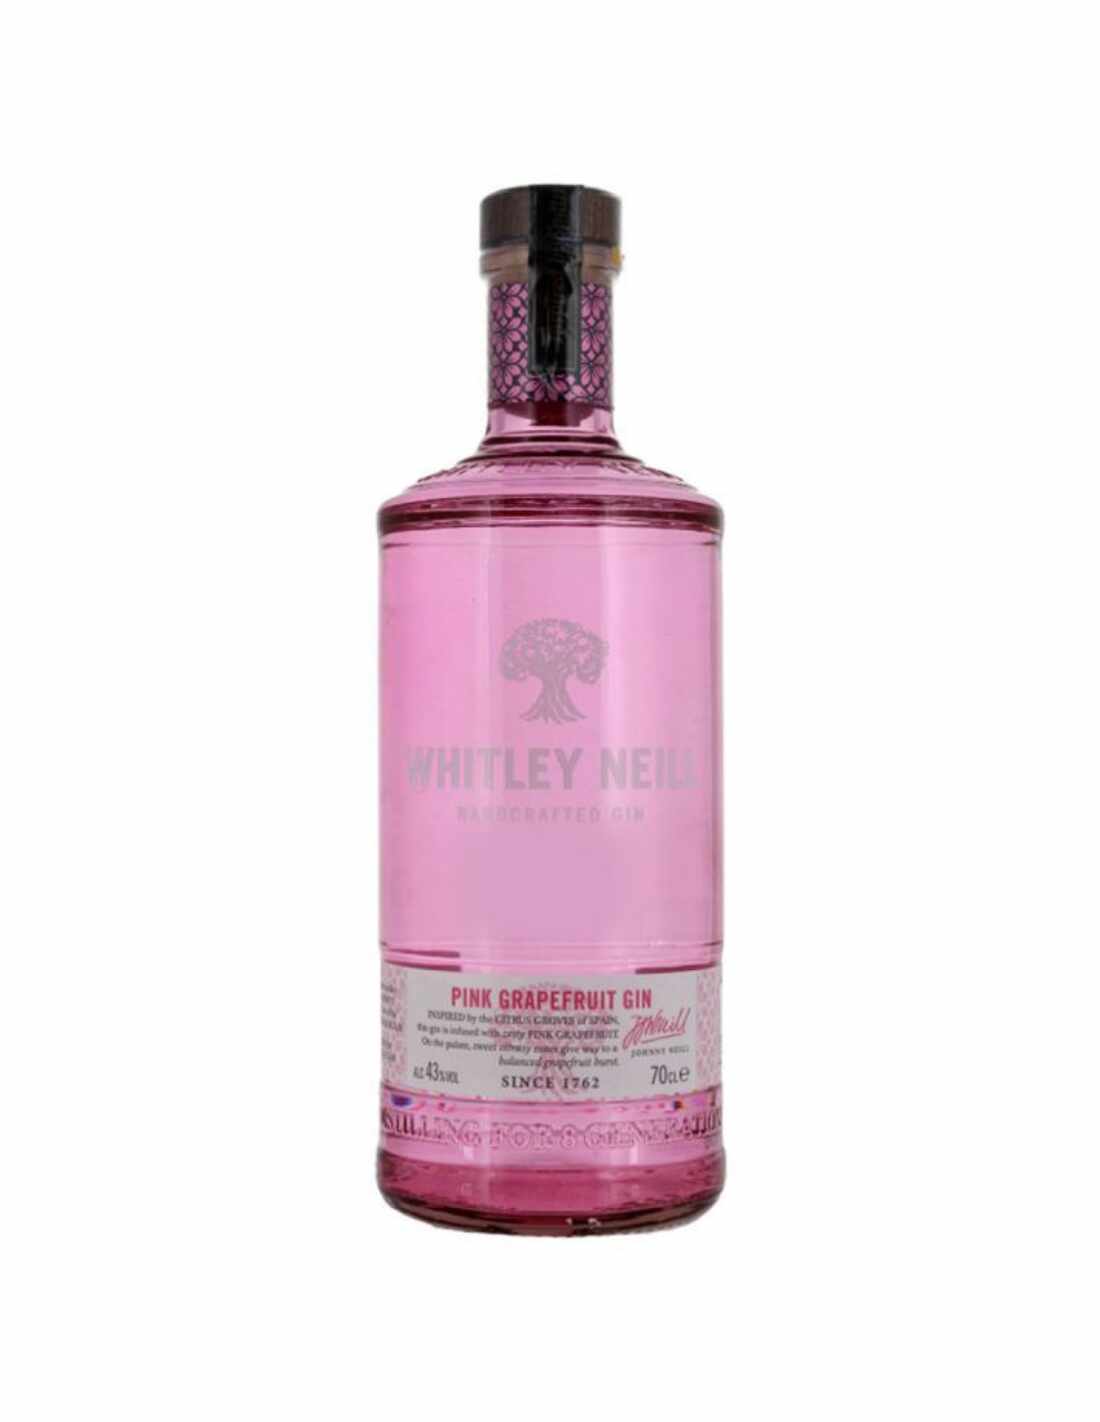 Gin Whitley Neill Pink Grapefruit, 43% alc., 0.7L, Anglia